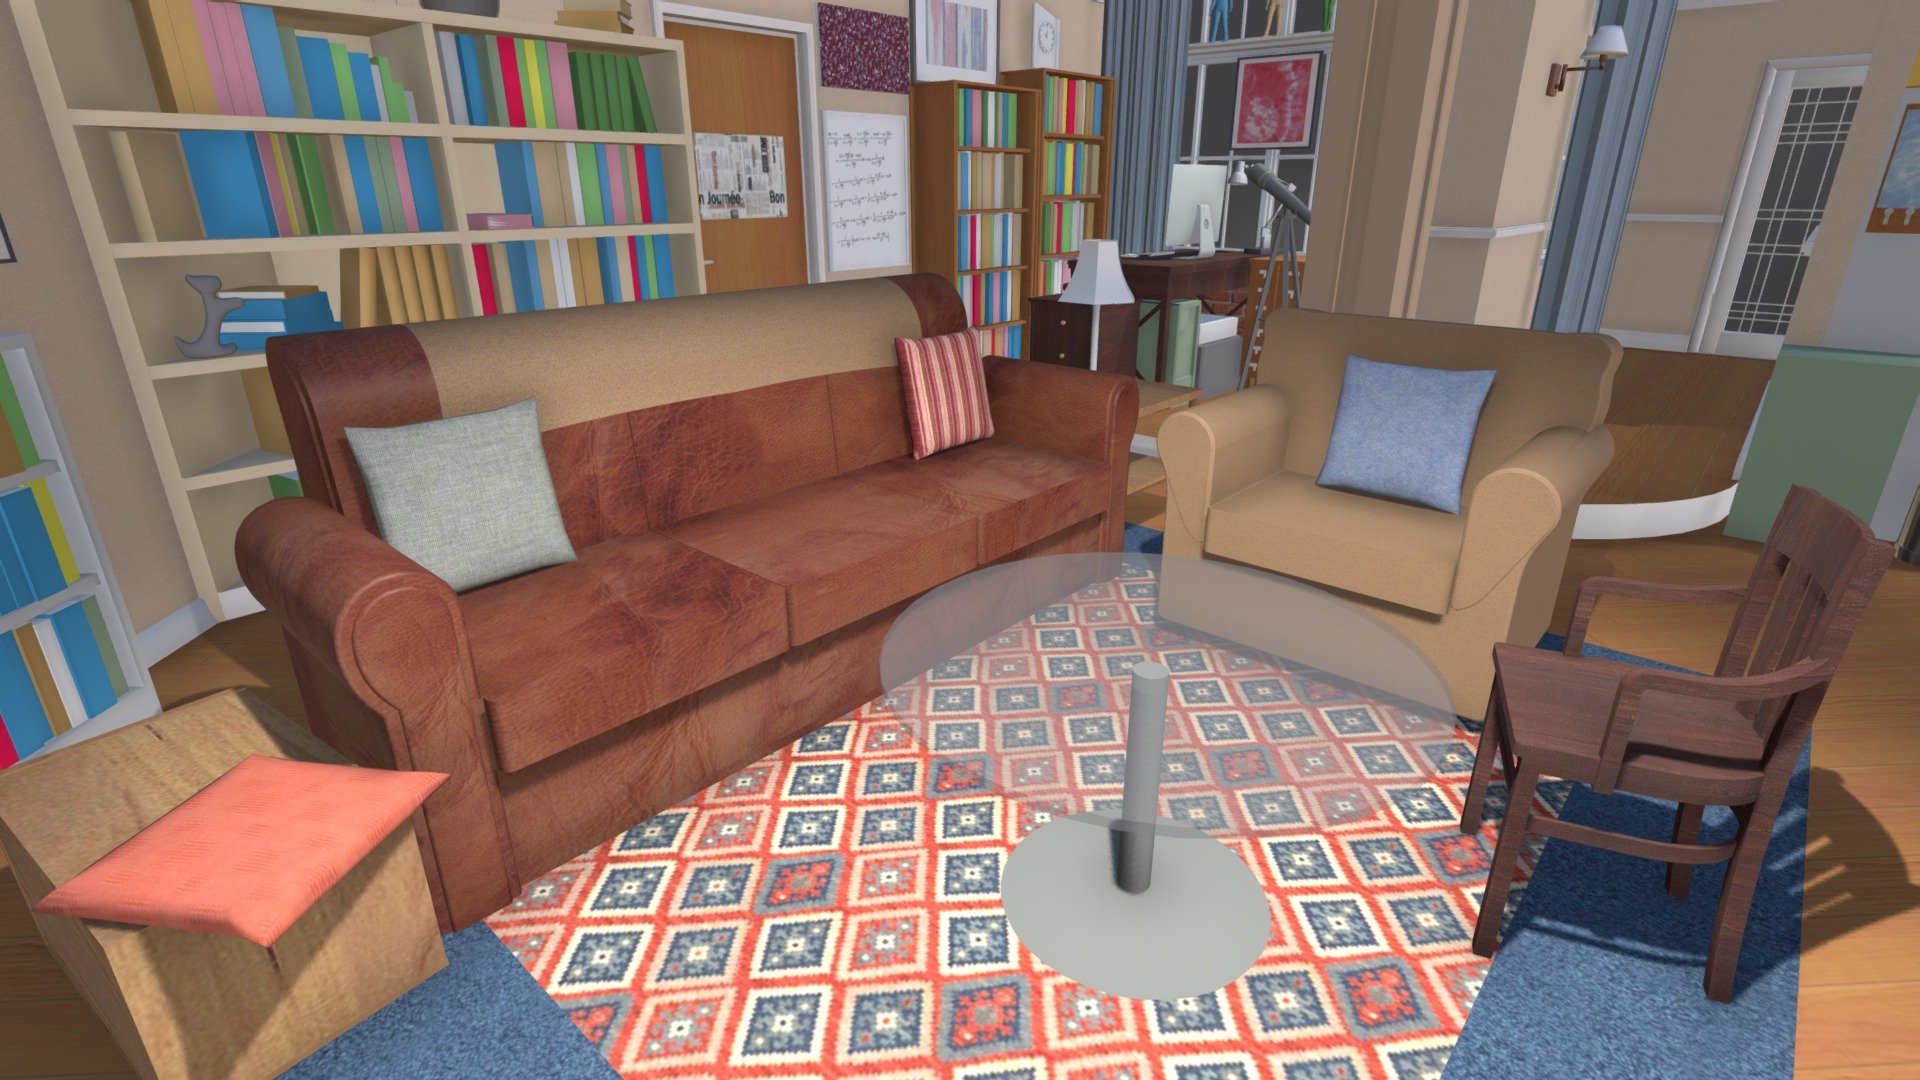 For all those who love The Big Bang Theory series, I replicated Sheldon and Leonard’s apartment, making it, hopefully, the most accurate and true-to-life. Enjoy the virtual model and, if you like, make your changes in it using the free version of Live Home 3D!

https://www.livehome3d.com/the-big-bang-theory-virtual-apartment/ - The Big Bang Theory Virtual Apartment - Download Free 3D model by iansed 3d model